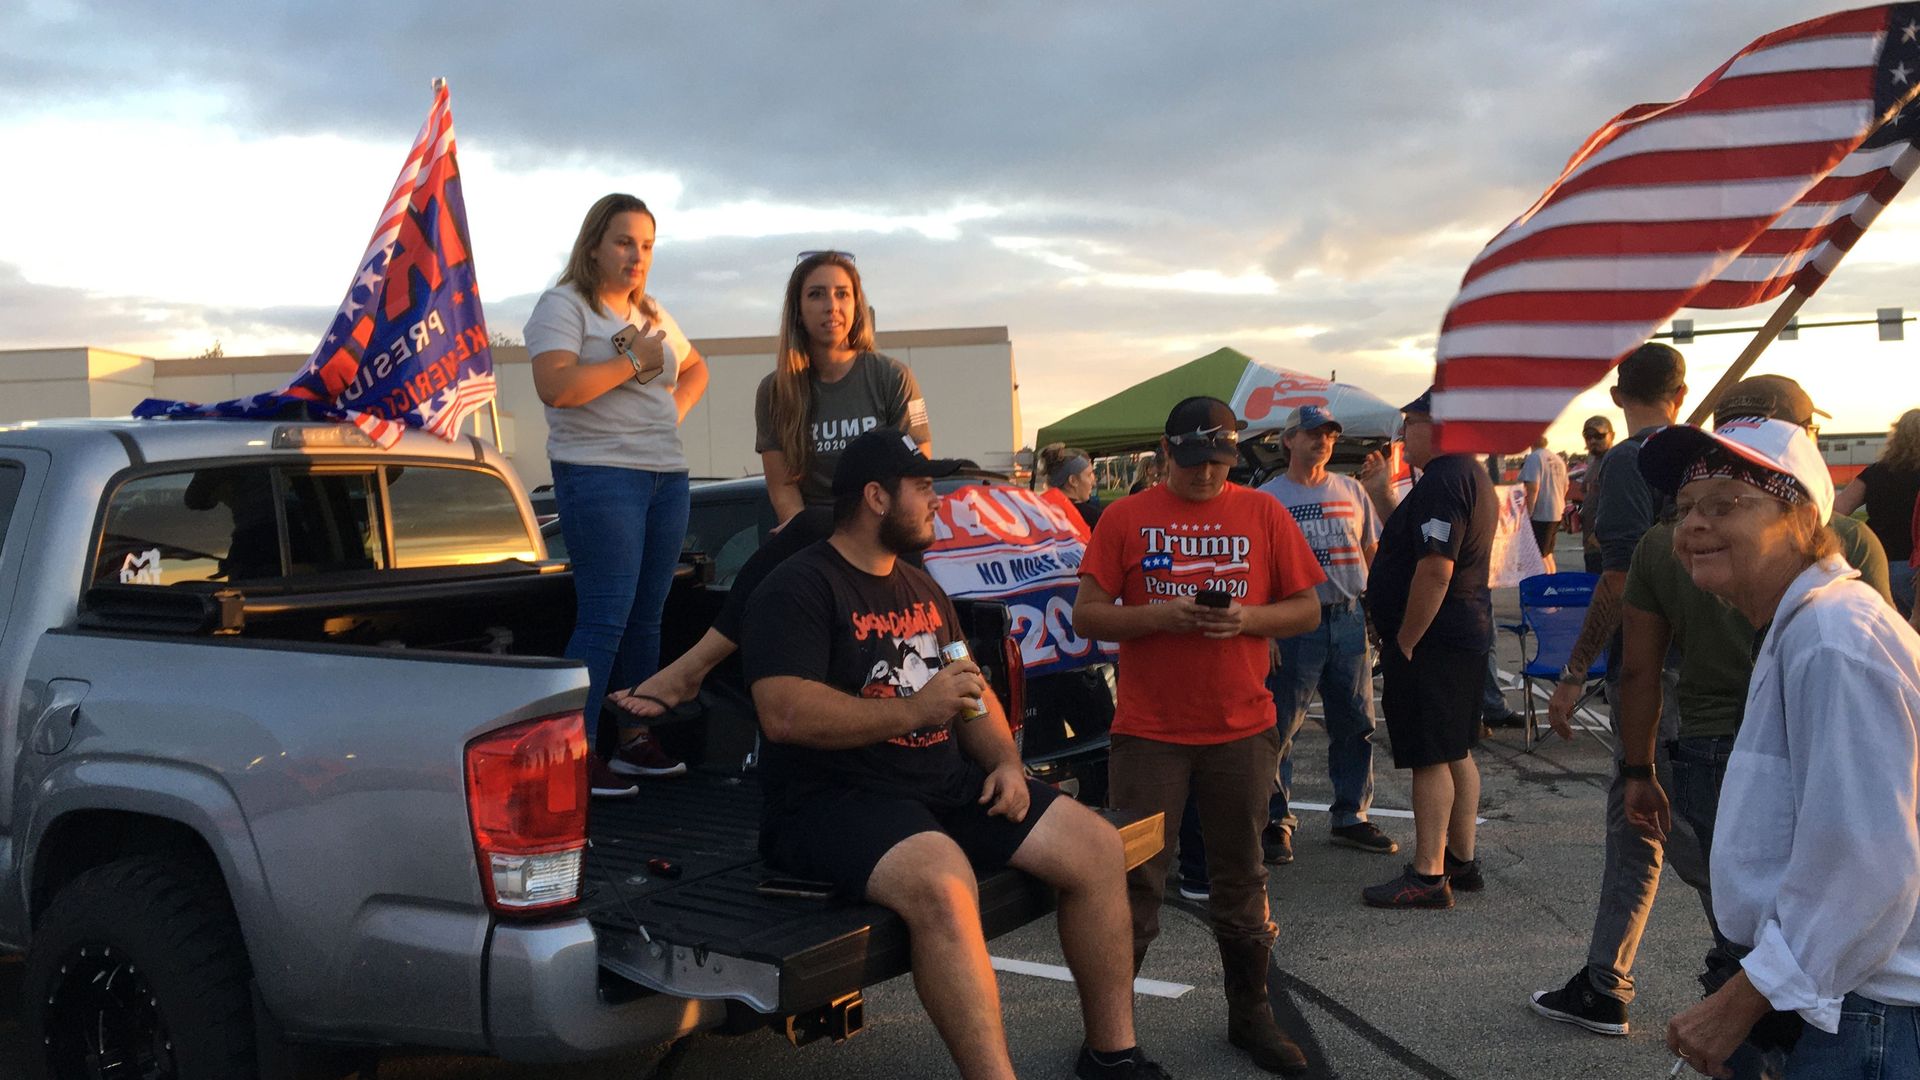 Supporters of the US president who were unable to enter the campaign venue because it was full, listen to his speech sitting in their pickup truck